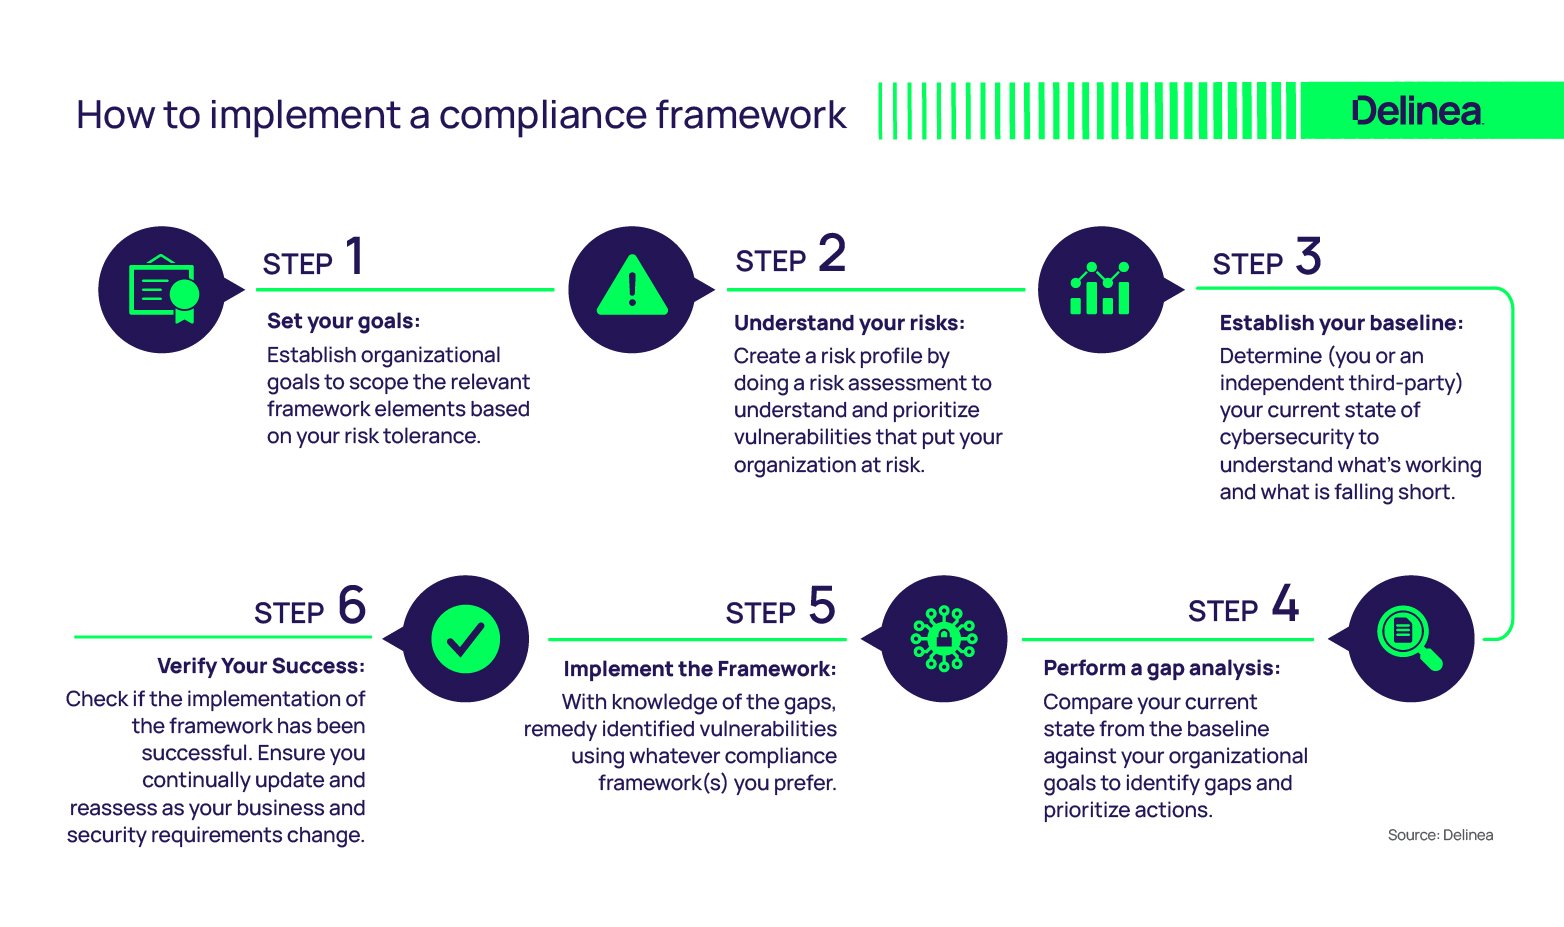 Steps to implement a compliance framework